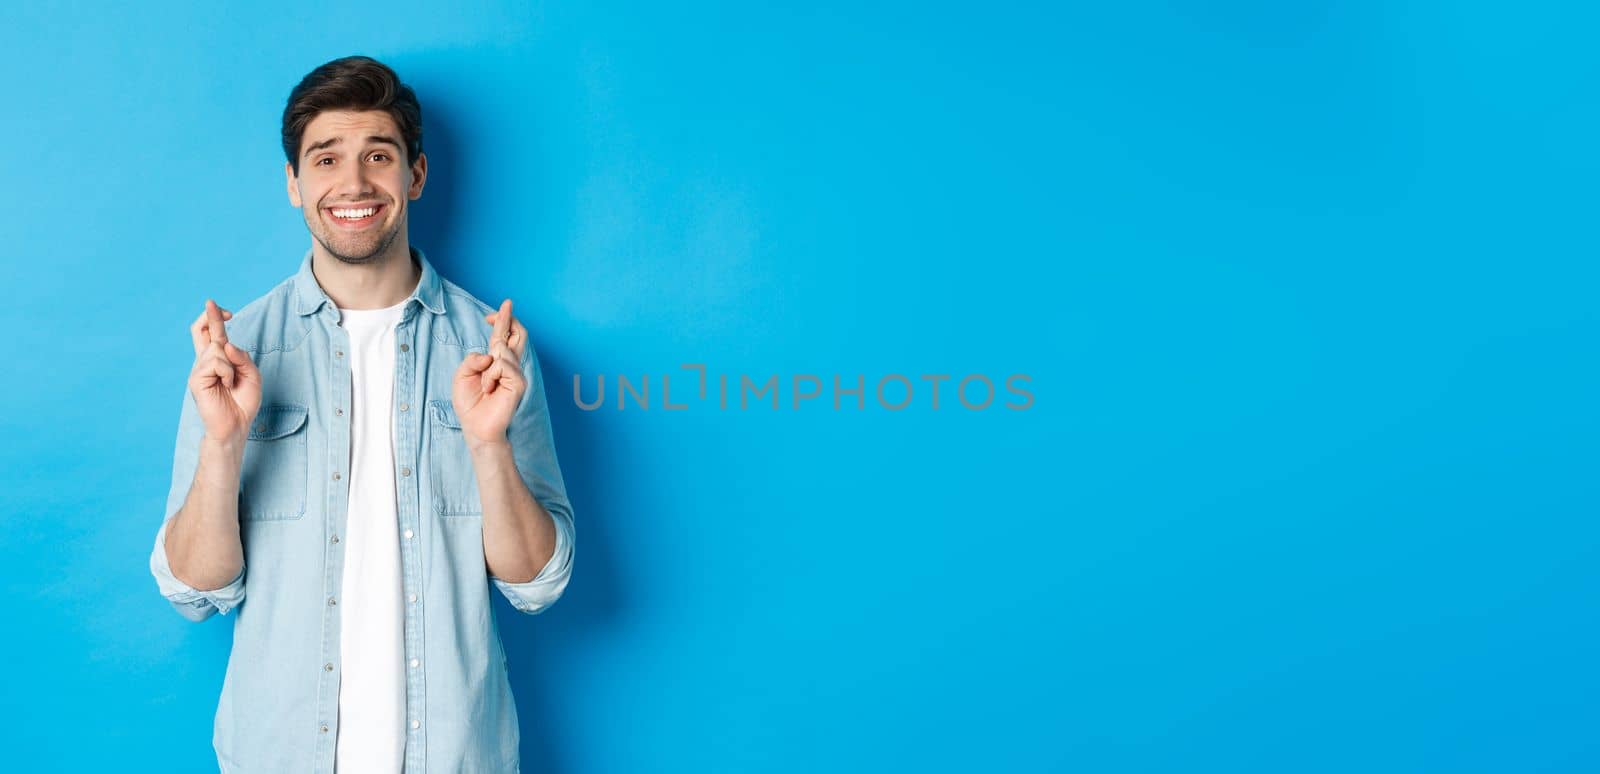 Handsome hopeful man making a wish, crossing fingers and smiling, waiting for results, standing against blue background.